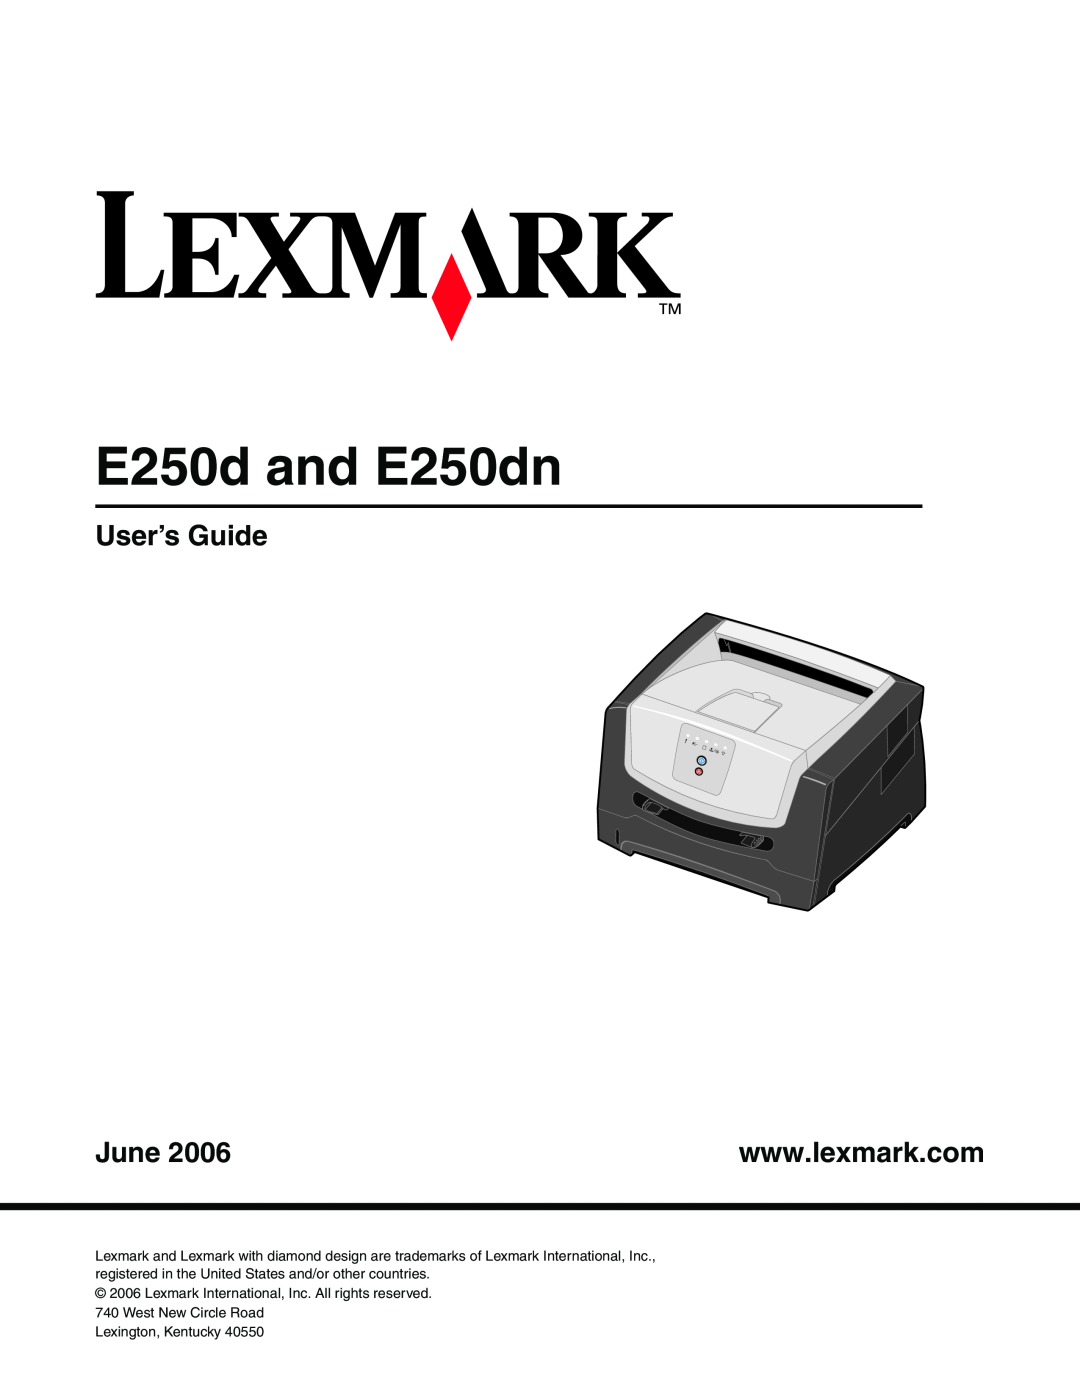 Lexmark manual E250d and E250dn, User’s Guide, June, Lexmark International, Inc. All rights reserved 